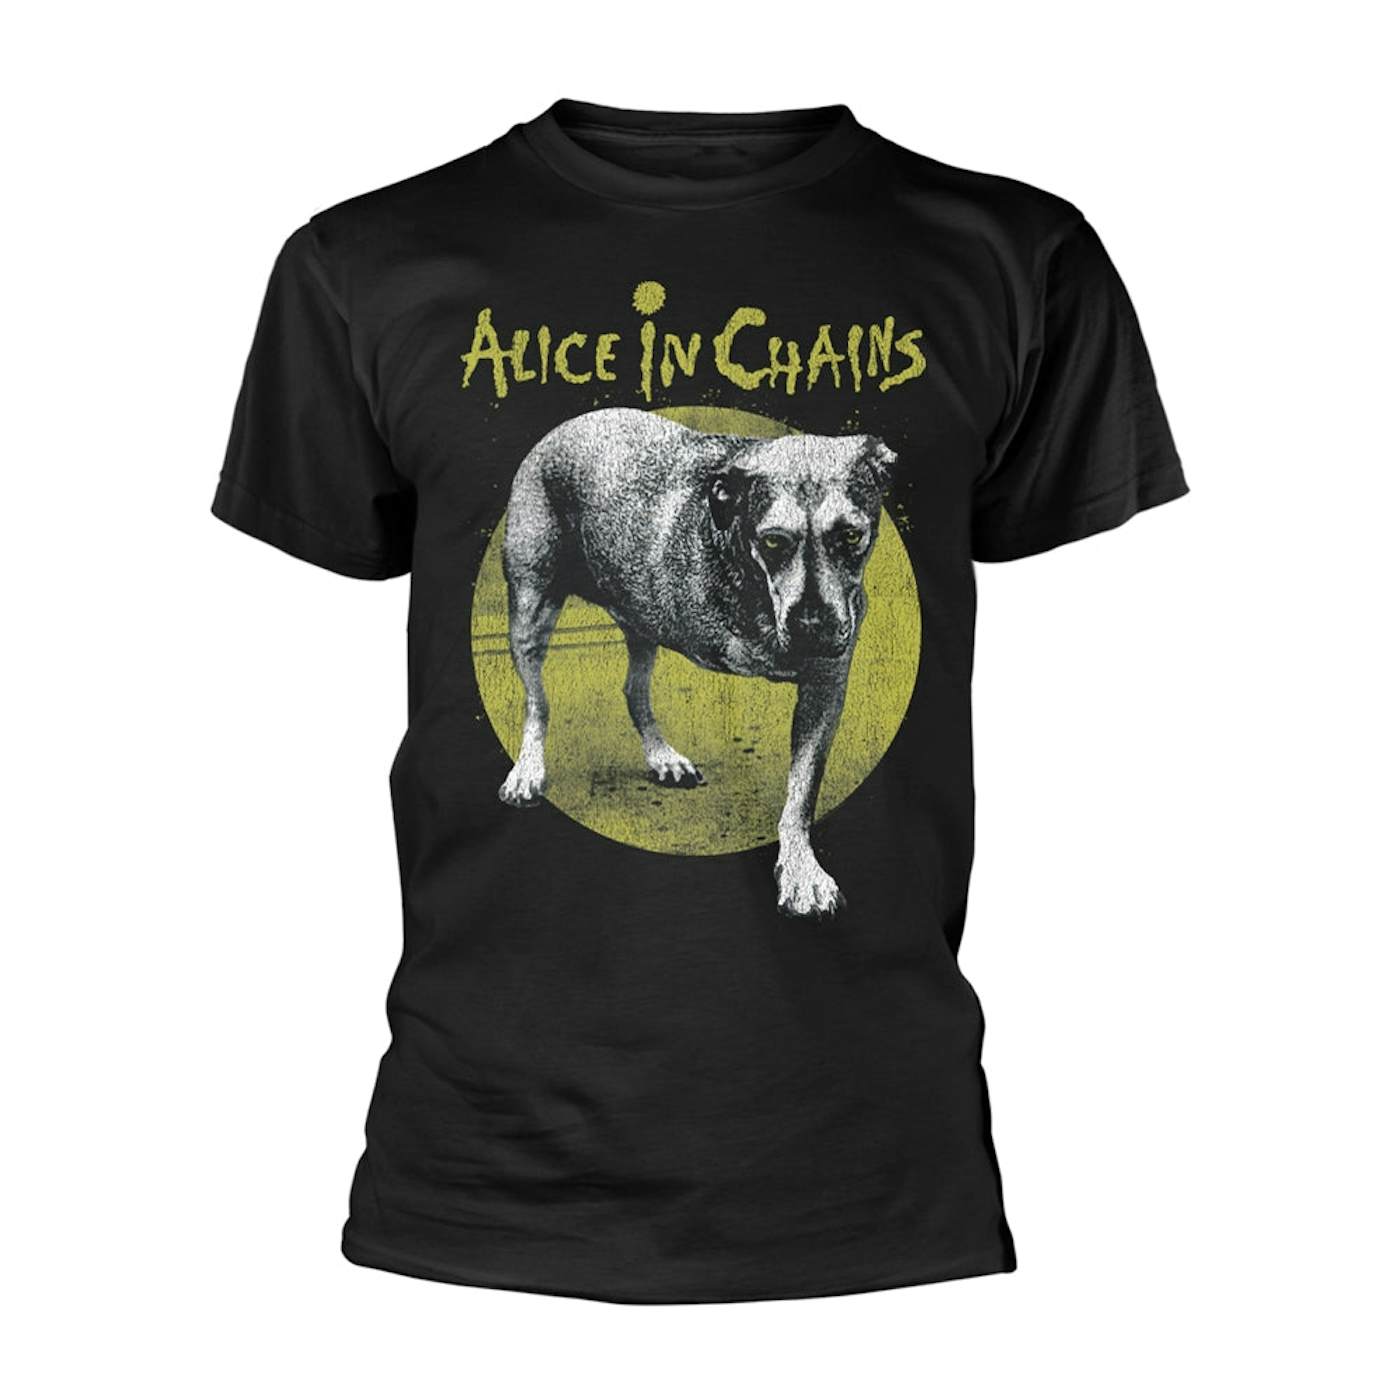 Alice In Chains T Shirt - Tripod